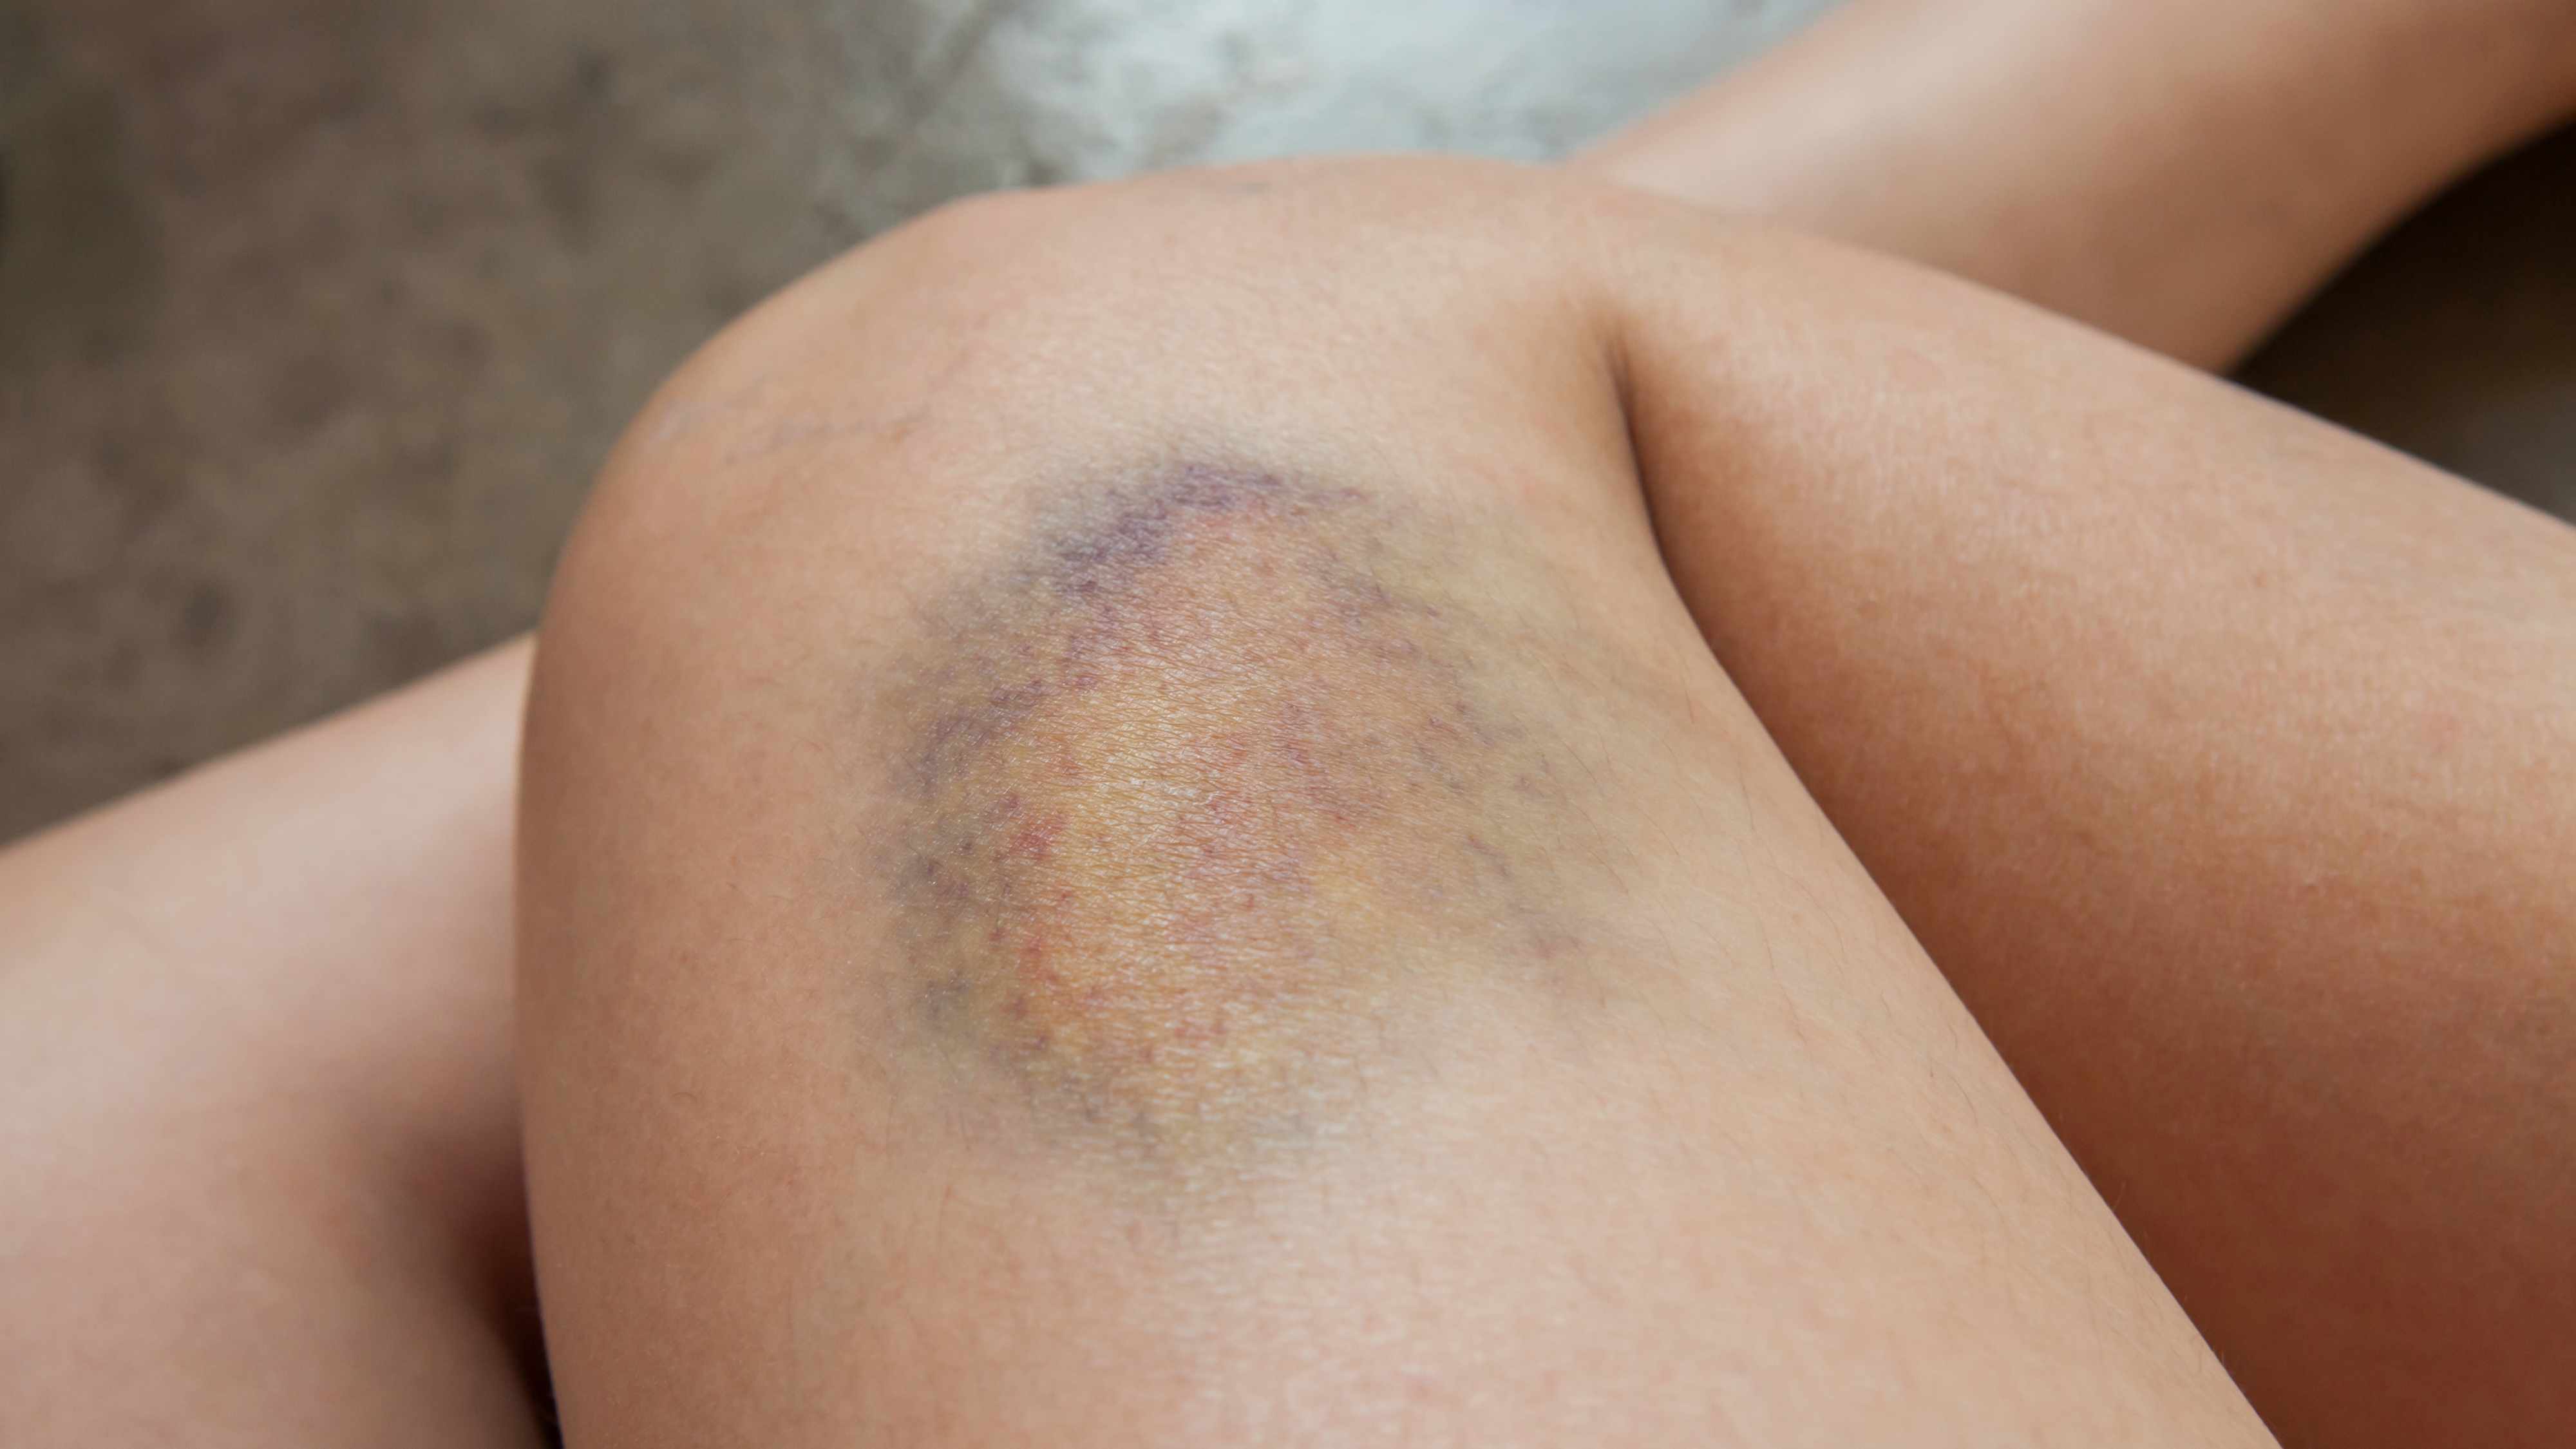 a person's leg with a large yellow, green and purple bruise